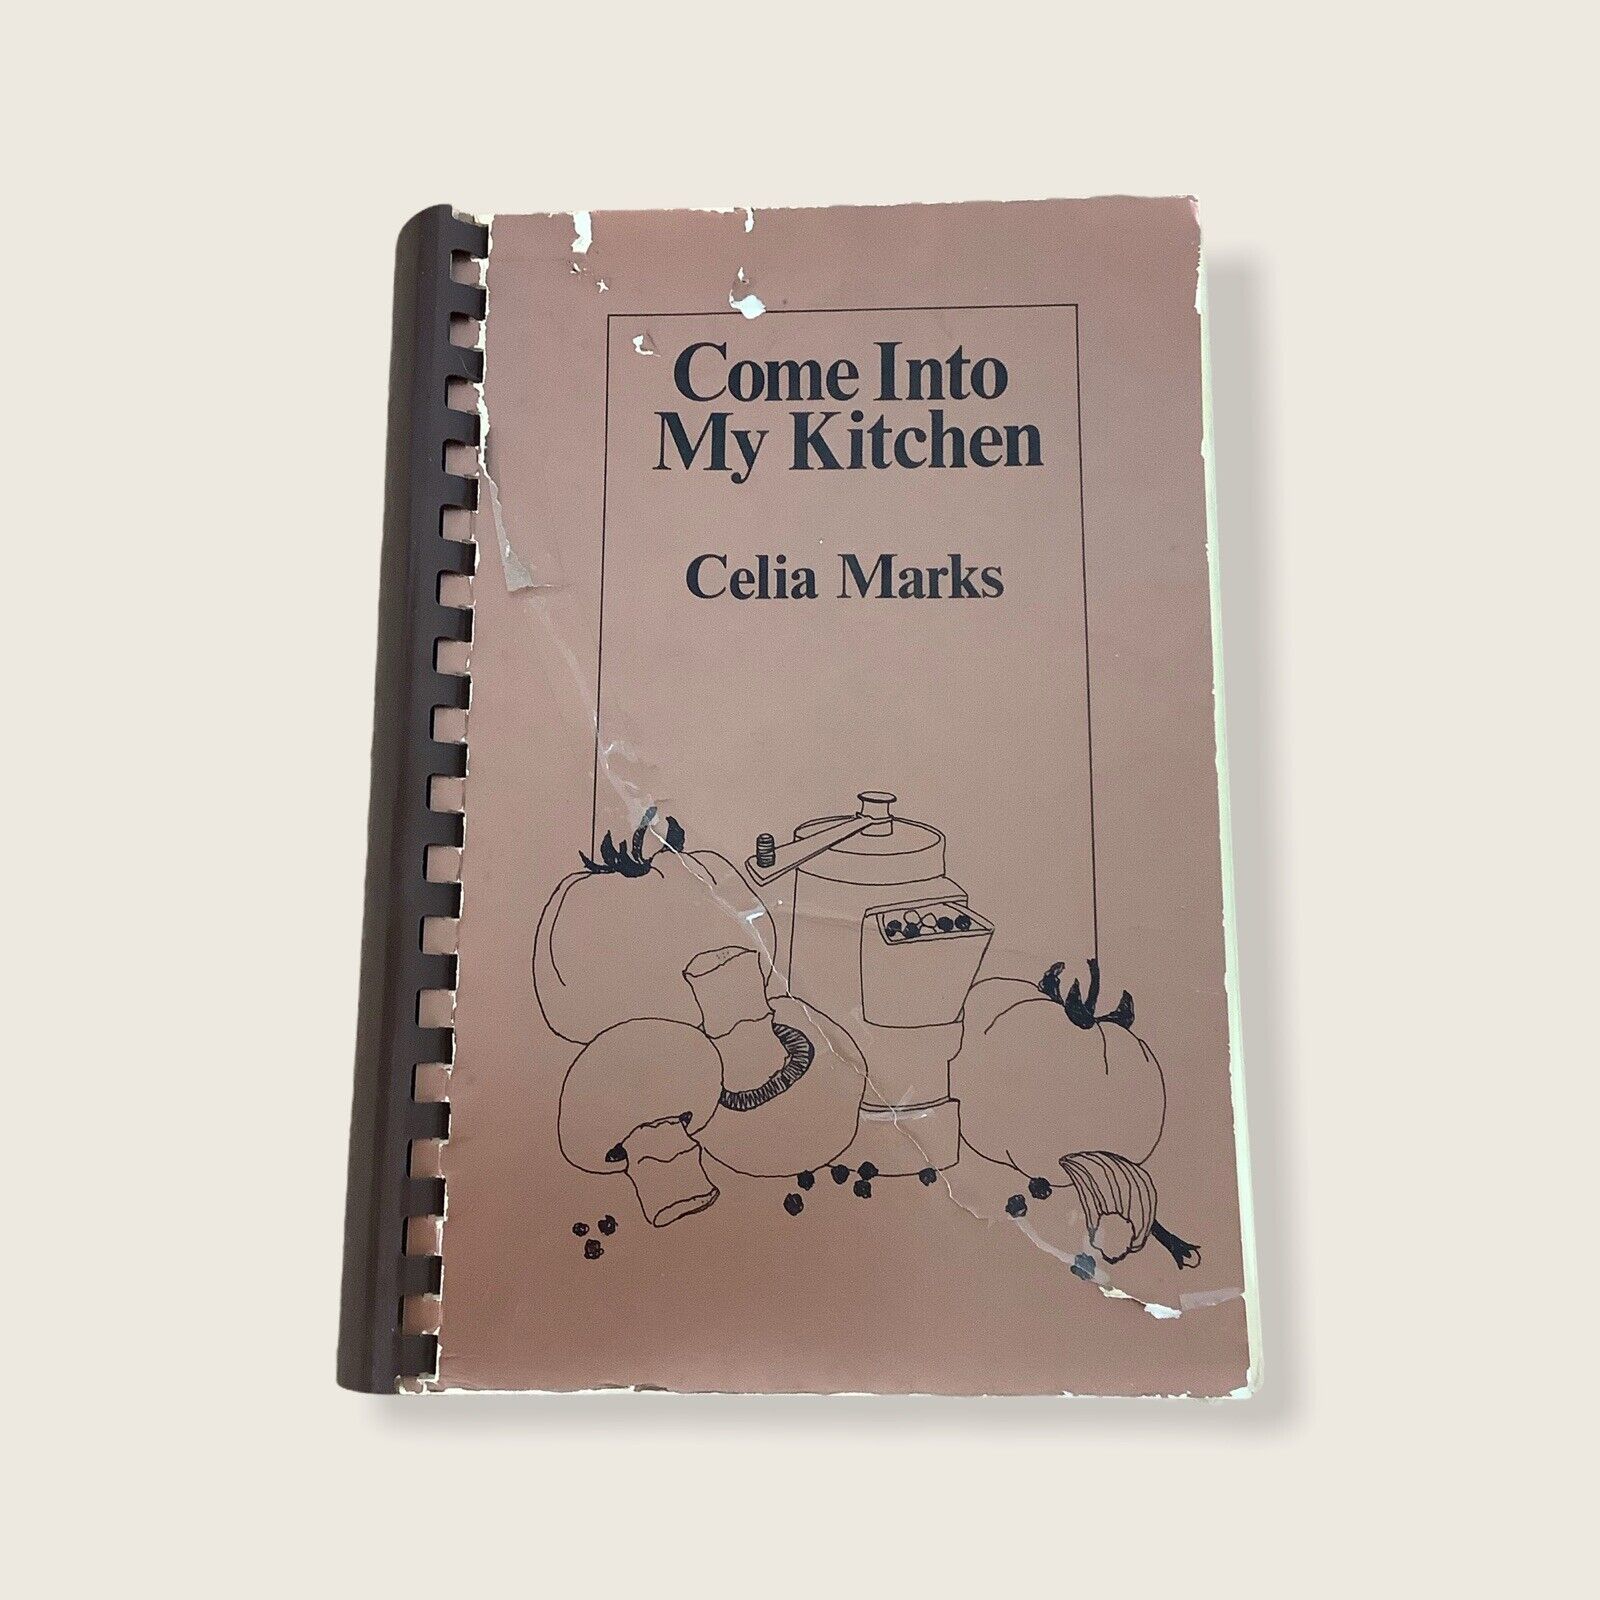 Come Into My Kitchen by Celia Marks Signed Cookbook Recipes Vintage 1969 